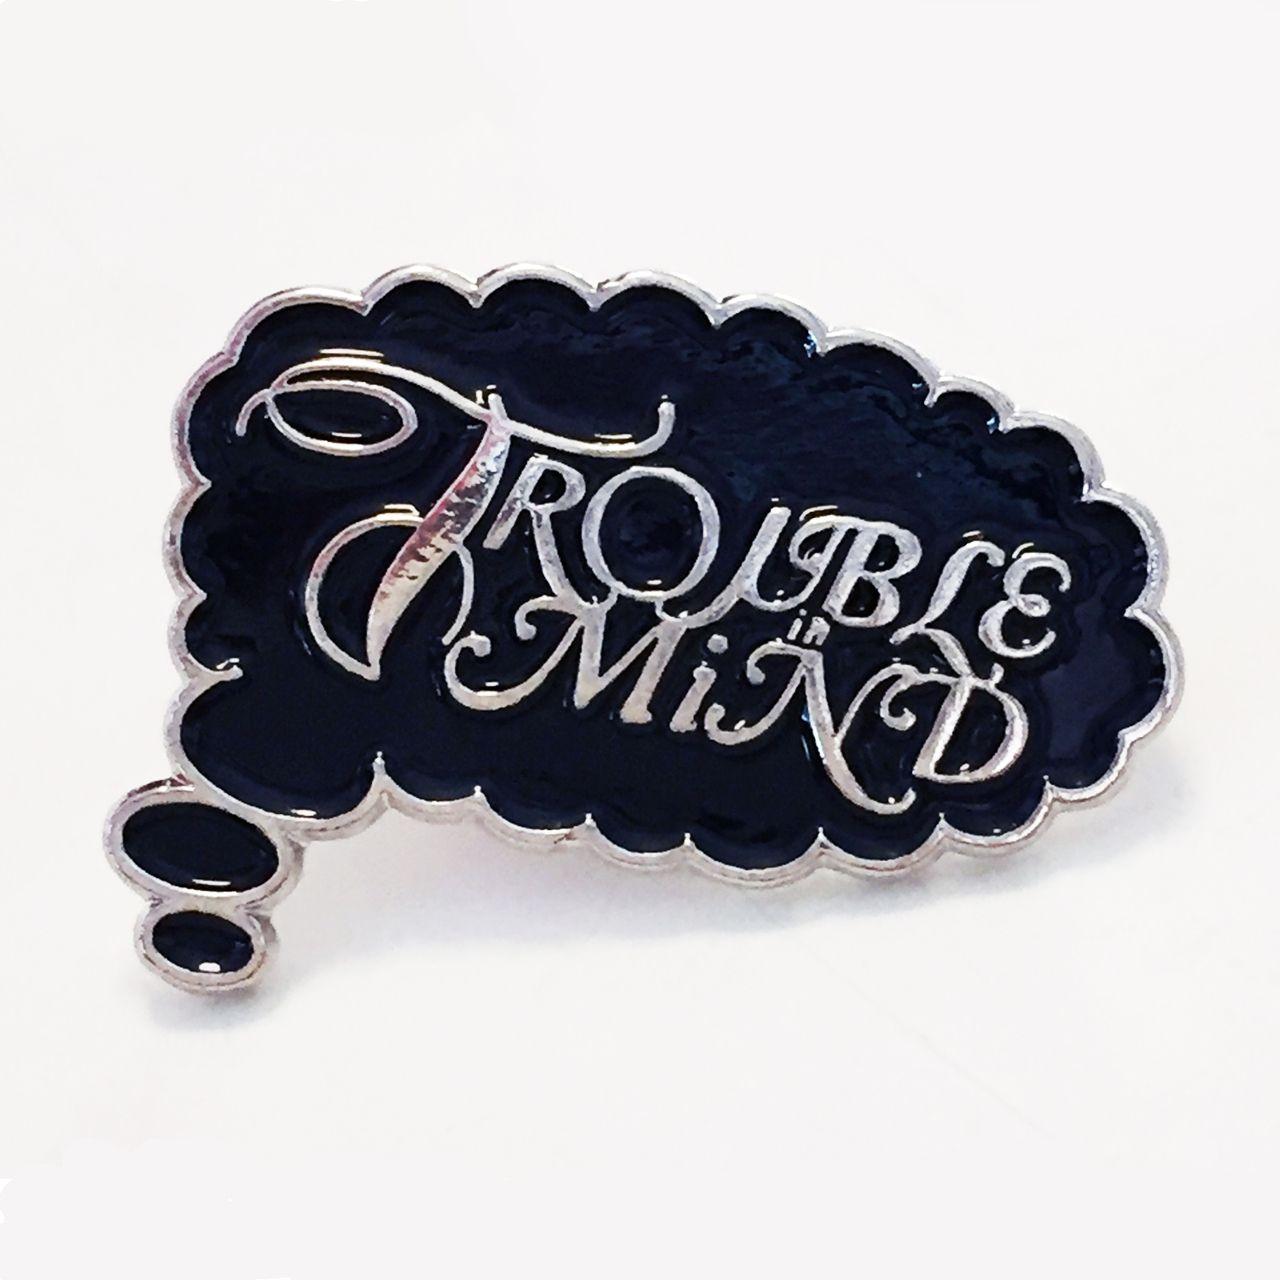 Trouble Logo - Trouble In Mind logo LAPEL PIN In Mind Records